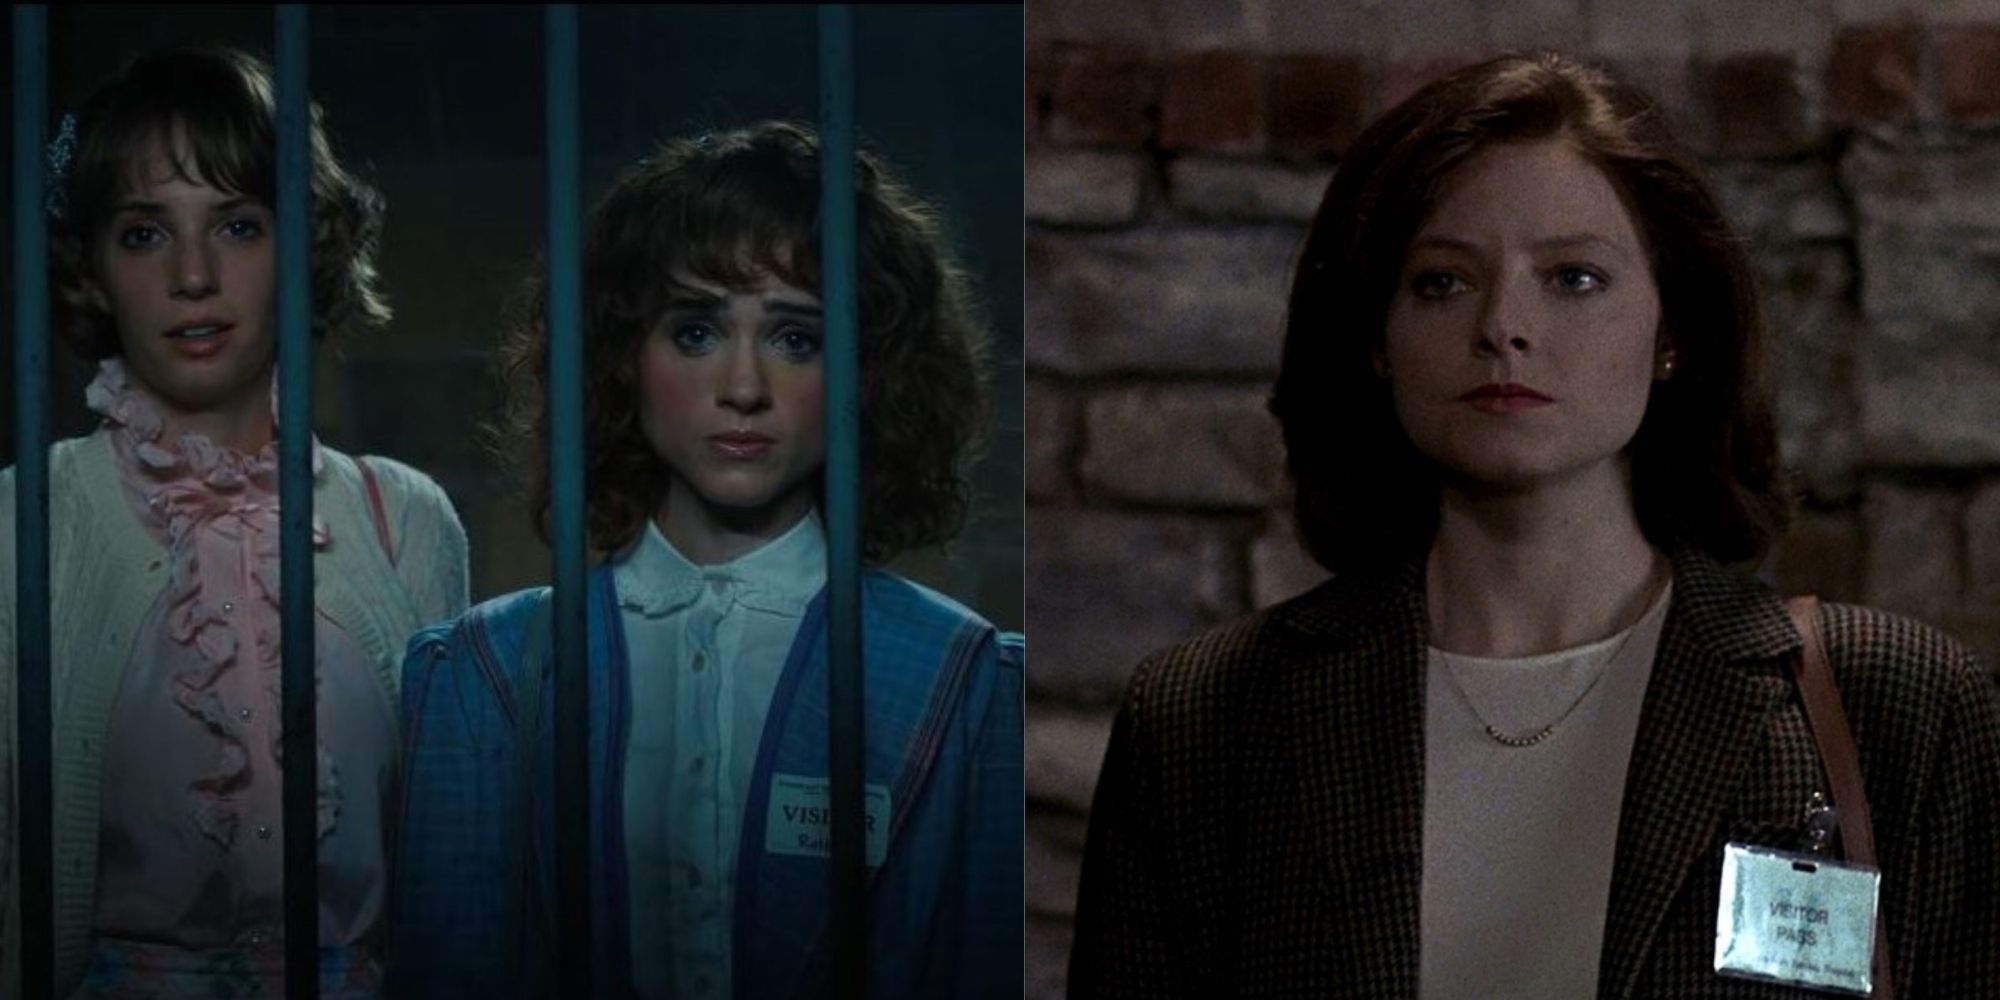 Stranger-Things-4-and-The-Silence-of-The-Lambs-1